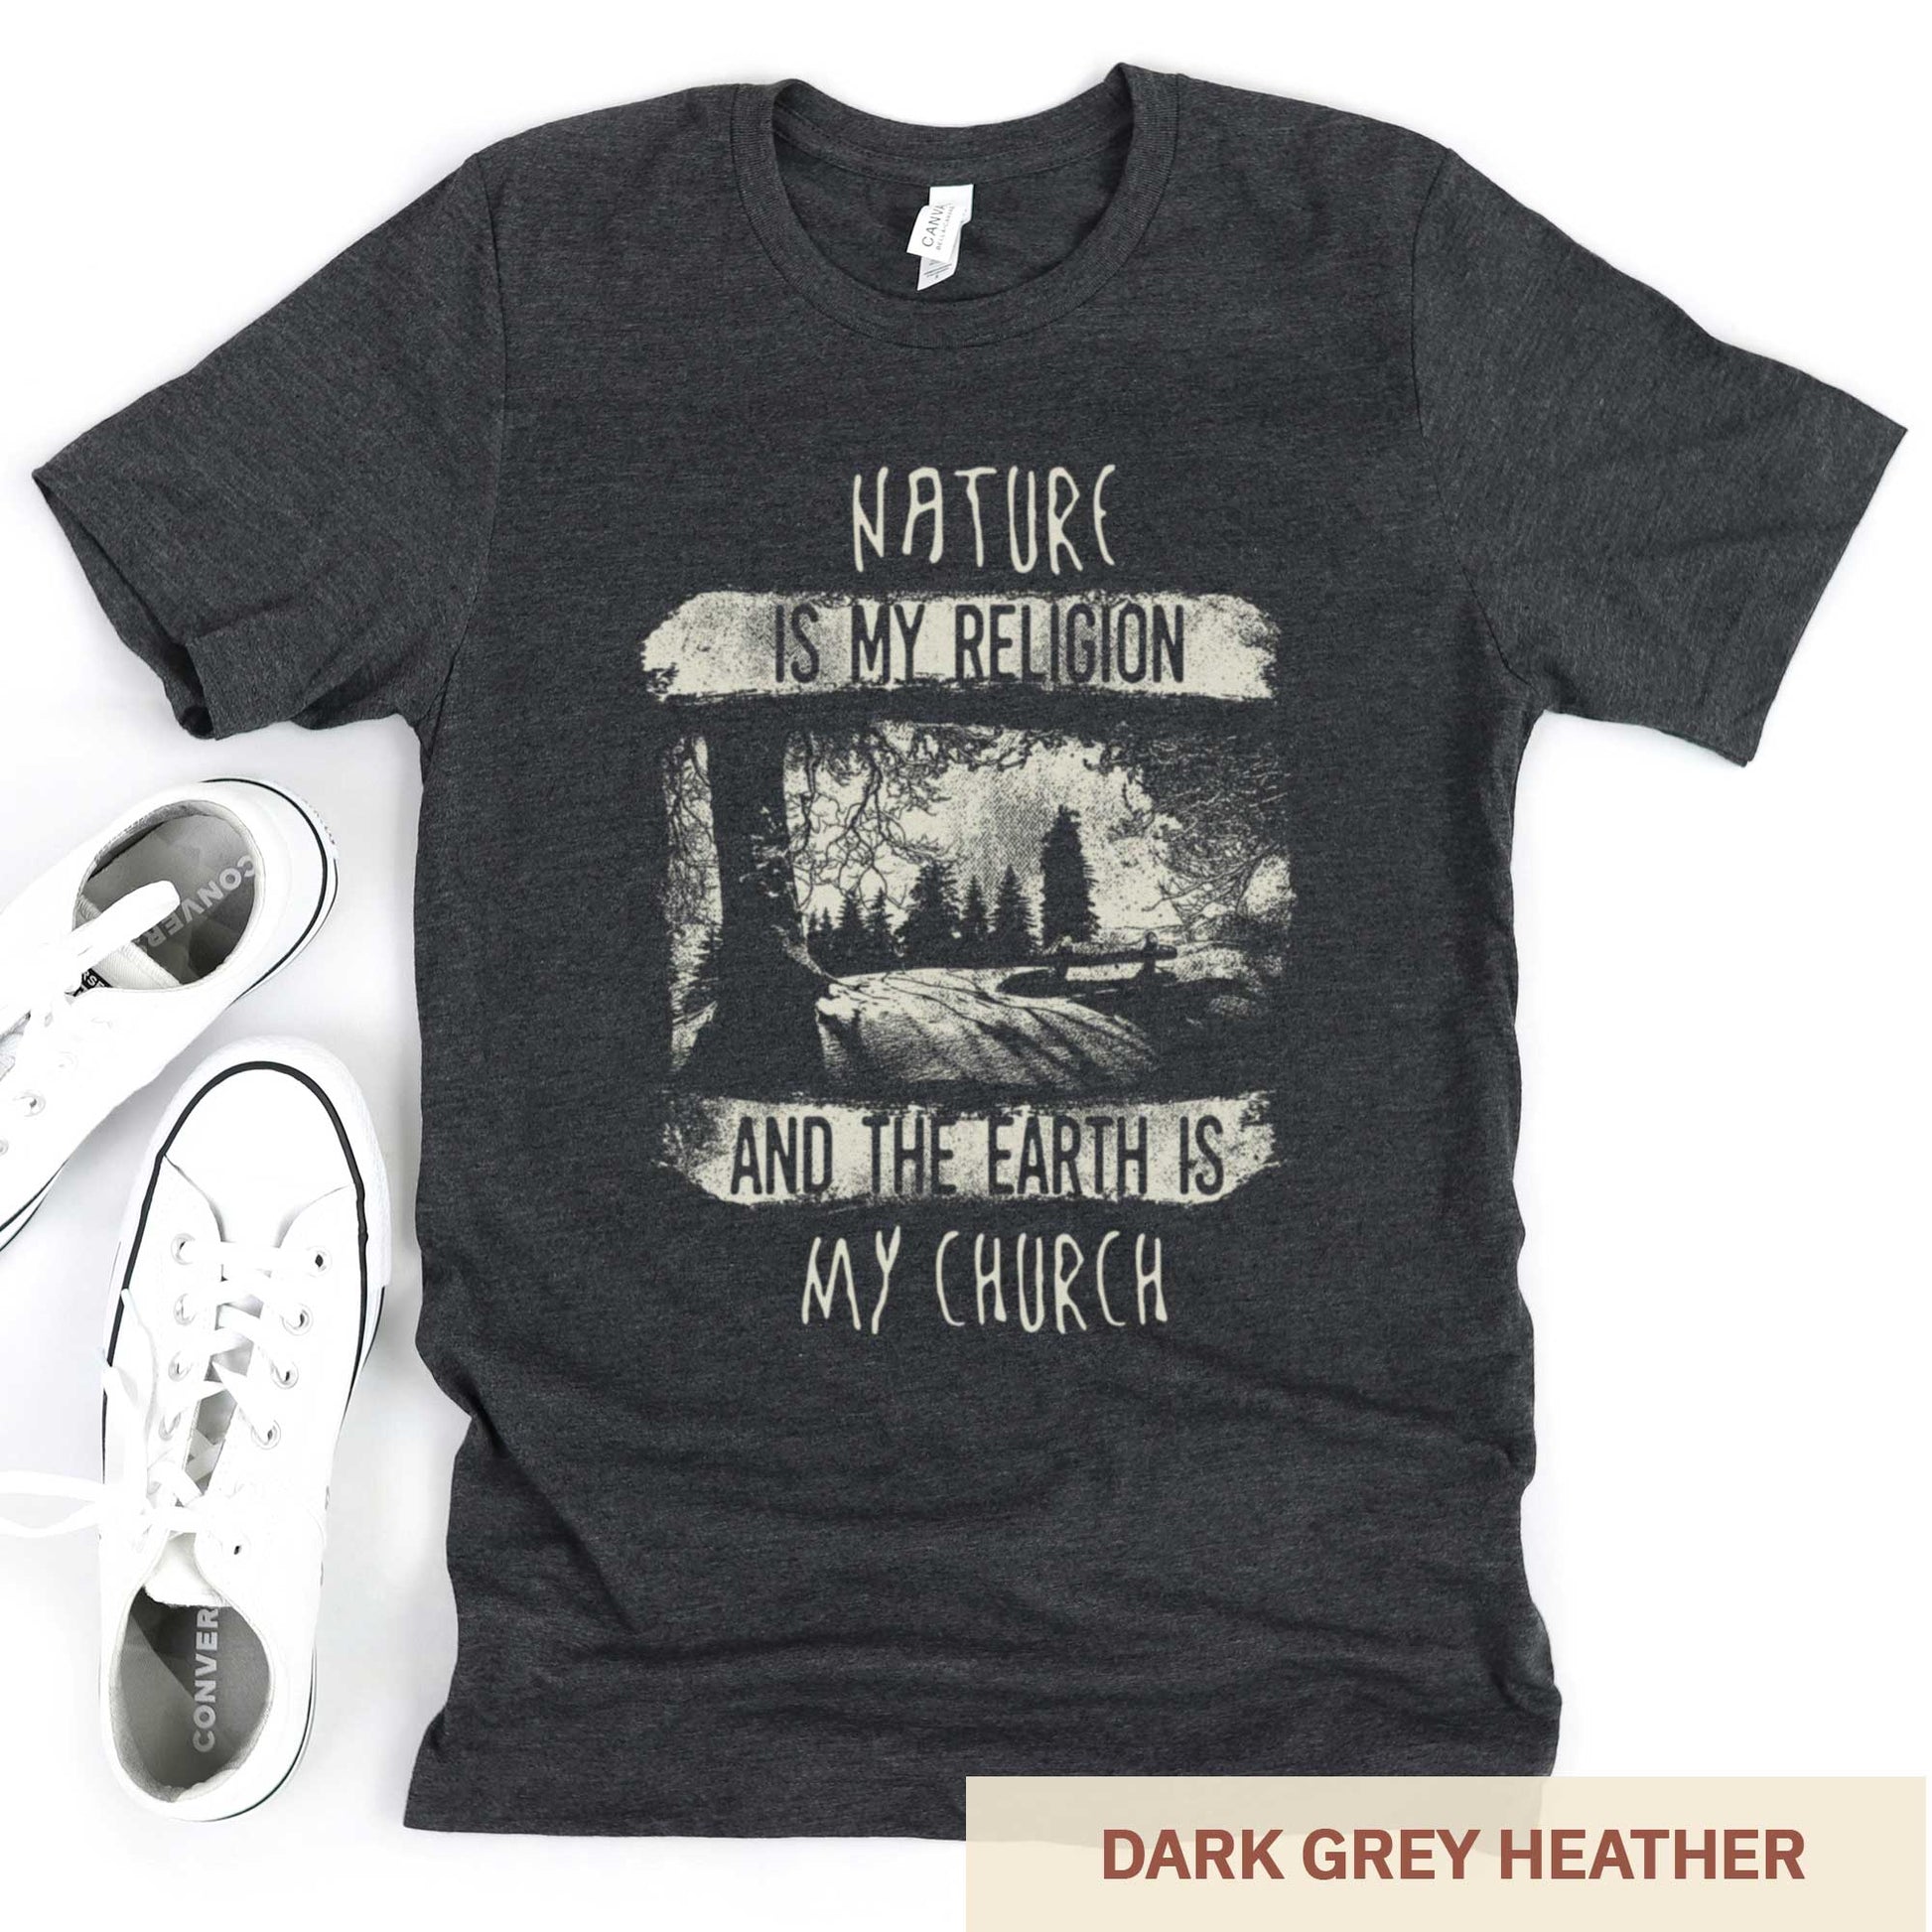 A dark grey heather Bella Canvas t-shirt featuring fields and a forest with the words nature is my religion and the earth is my church.